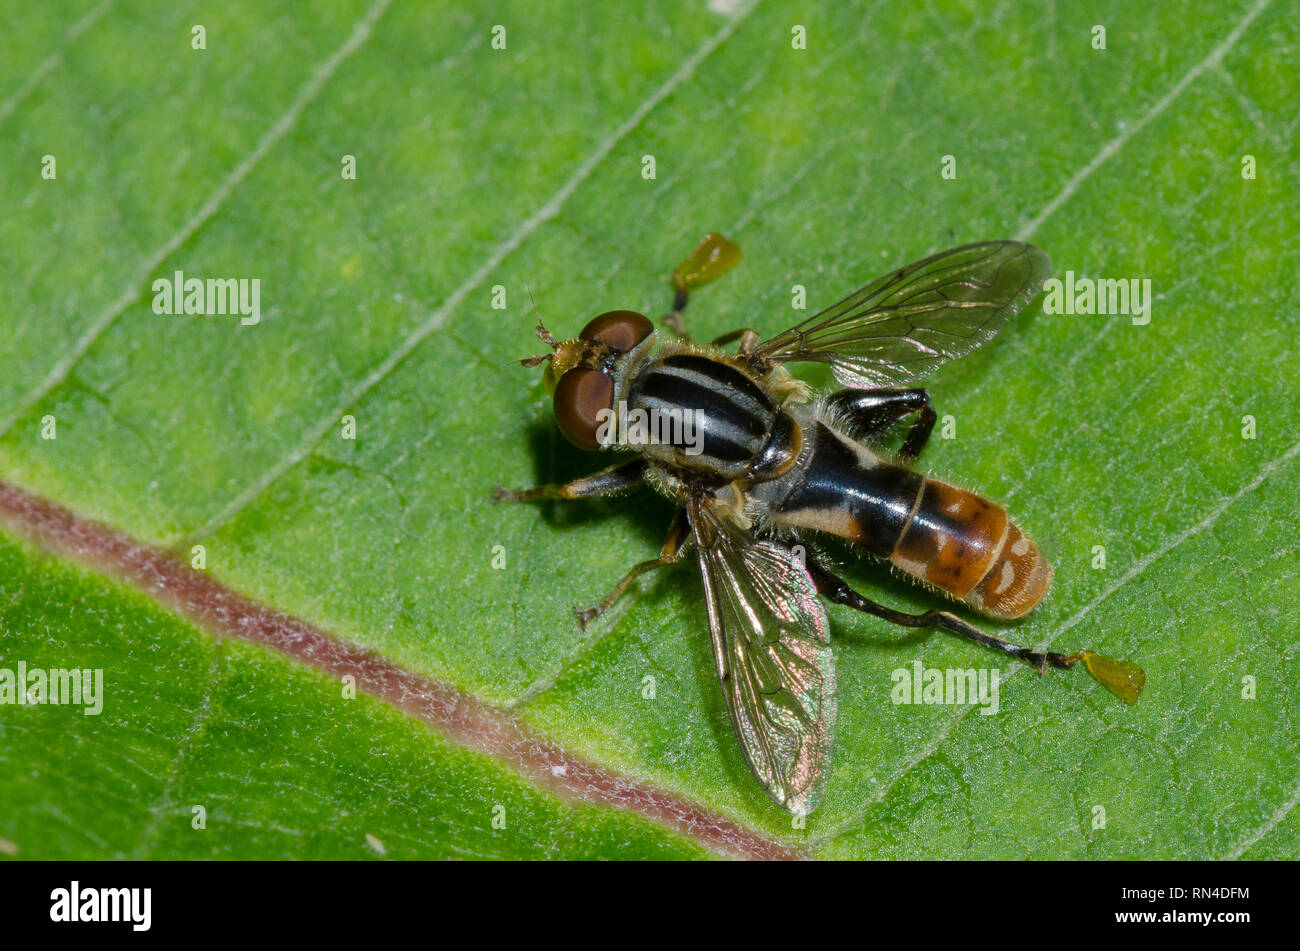 Syrphid Fly, Lejops sp. Stock Photo